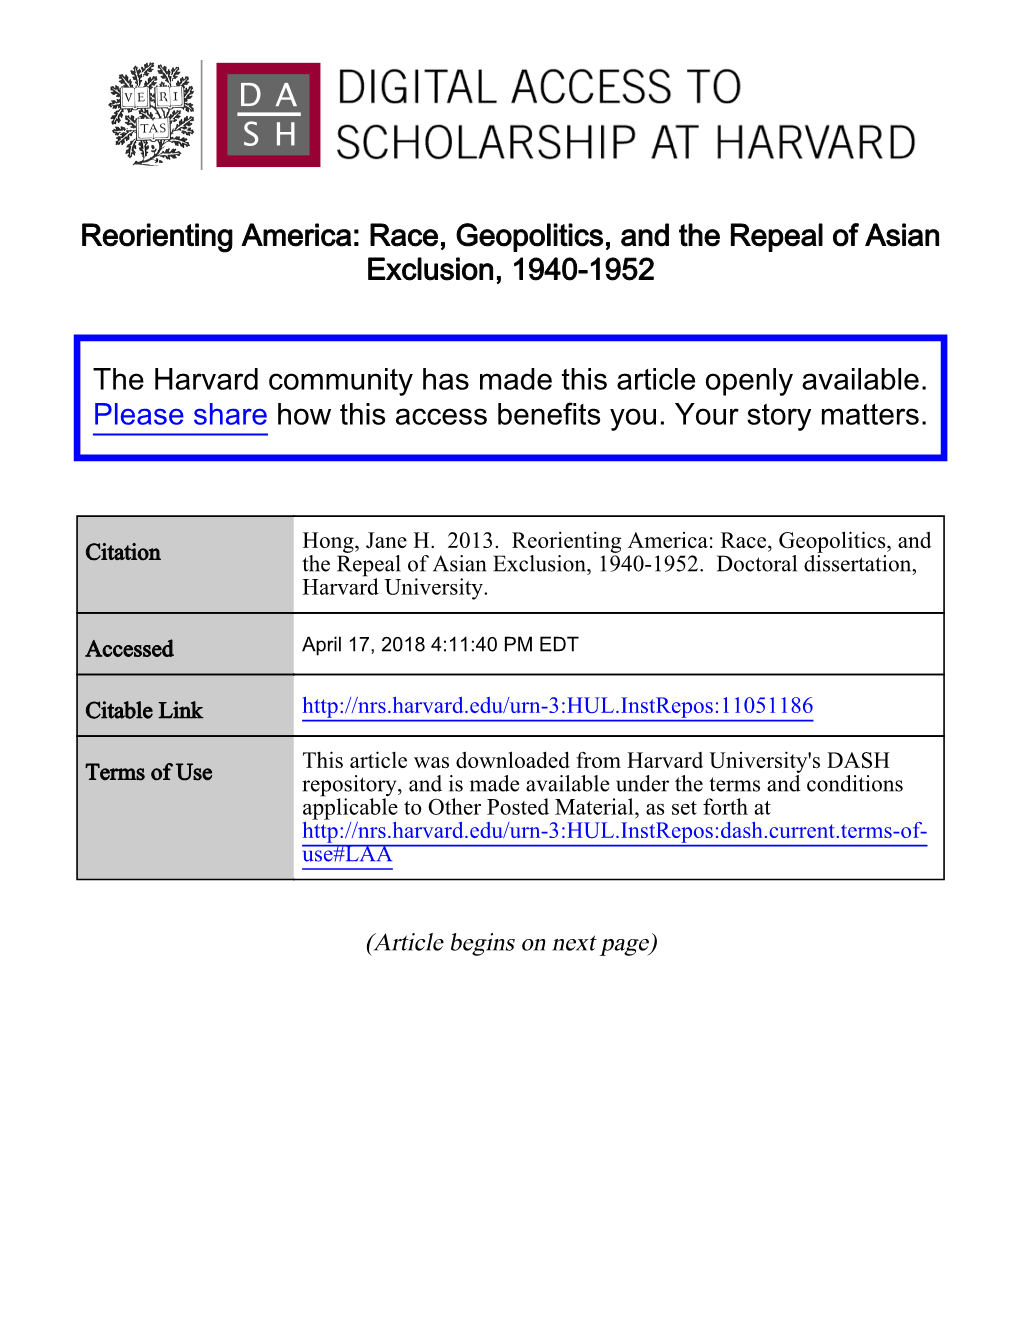 Race, Geopolitics, and the Repeal of Asian Exclusion, 1940-1952